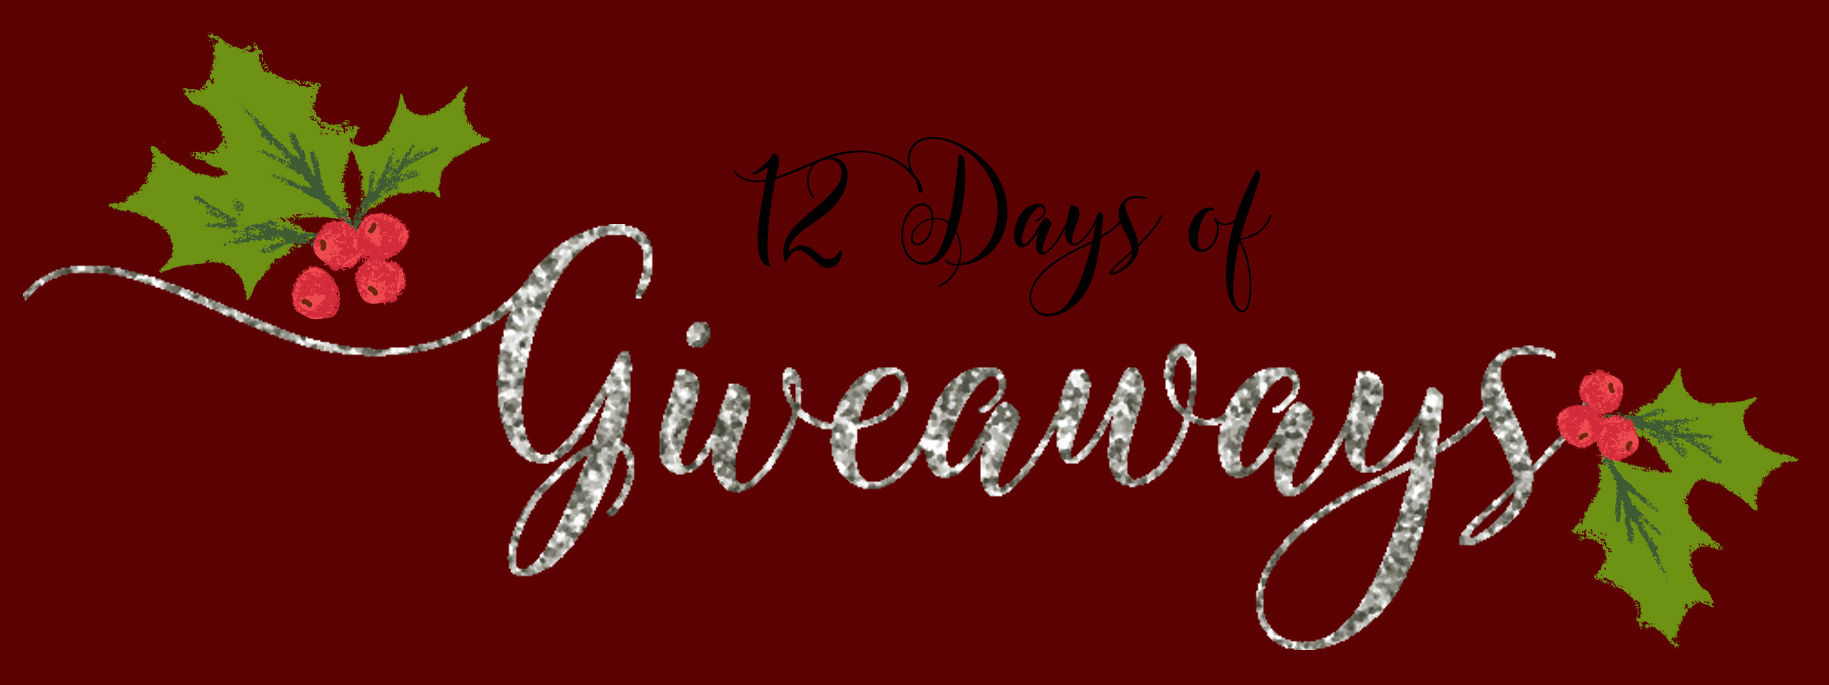 12 Days of Giveaways! 2018 | Whispering Hollow Creatives | Billings, Montana Portrait Photographer